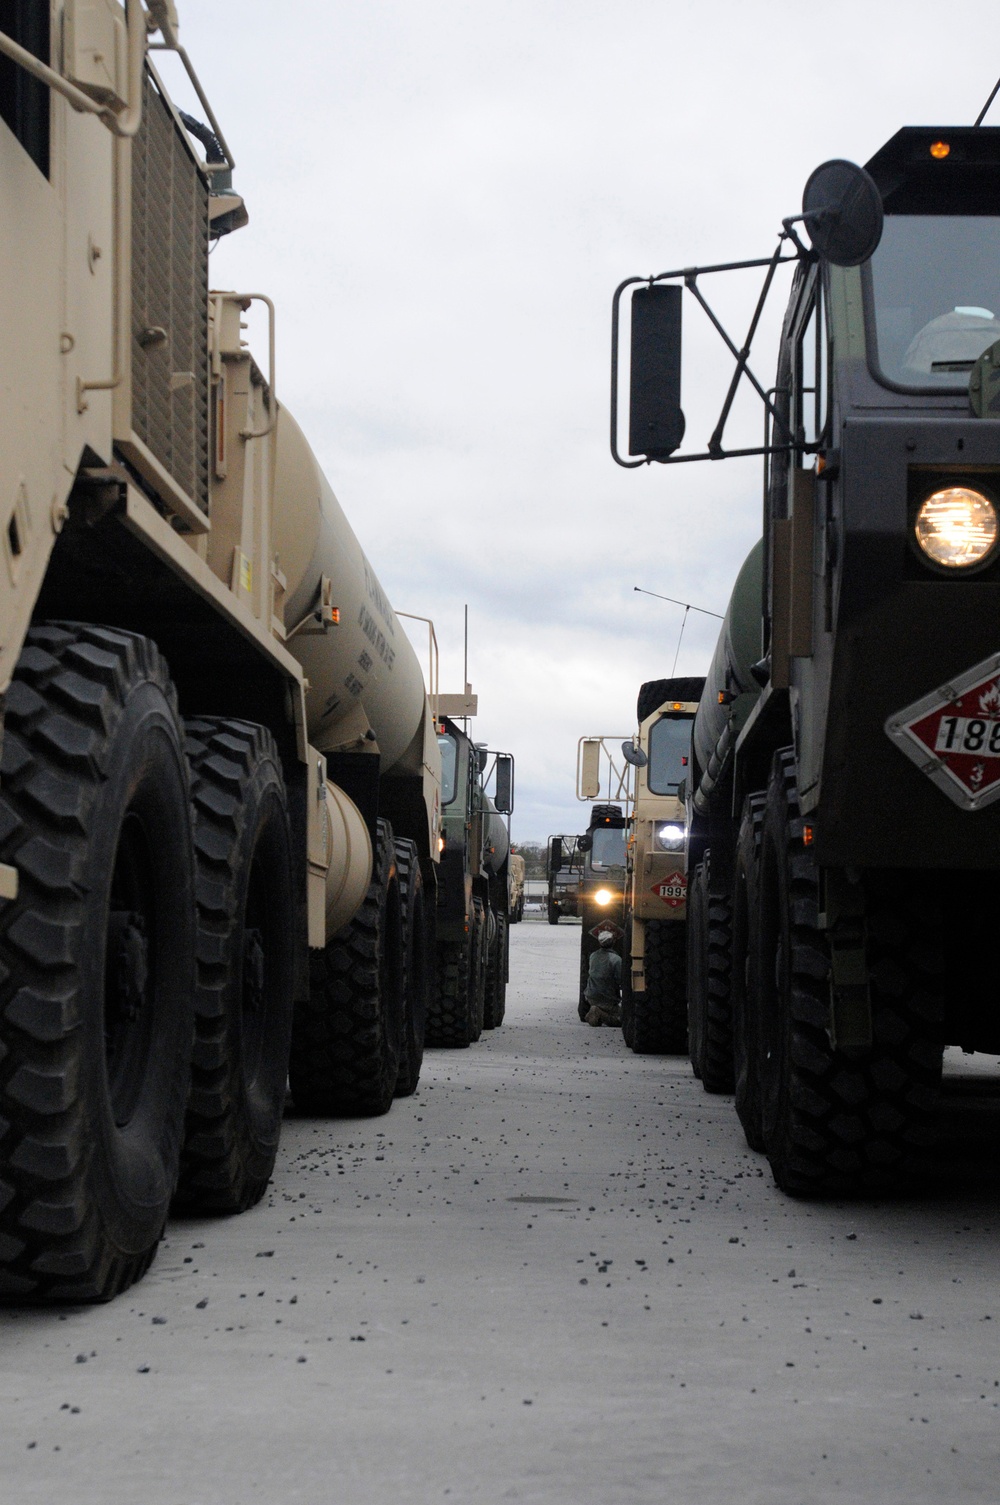 Army vehicles on standby for disaster relief fueling missions